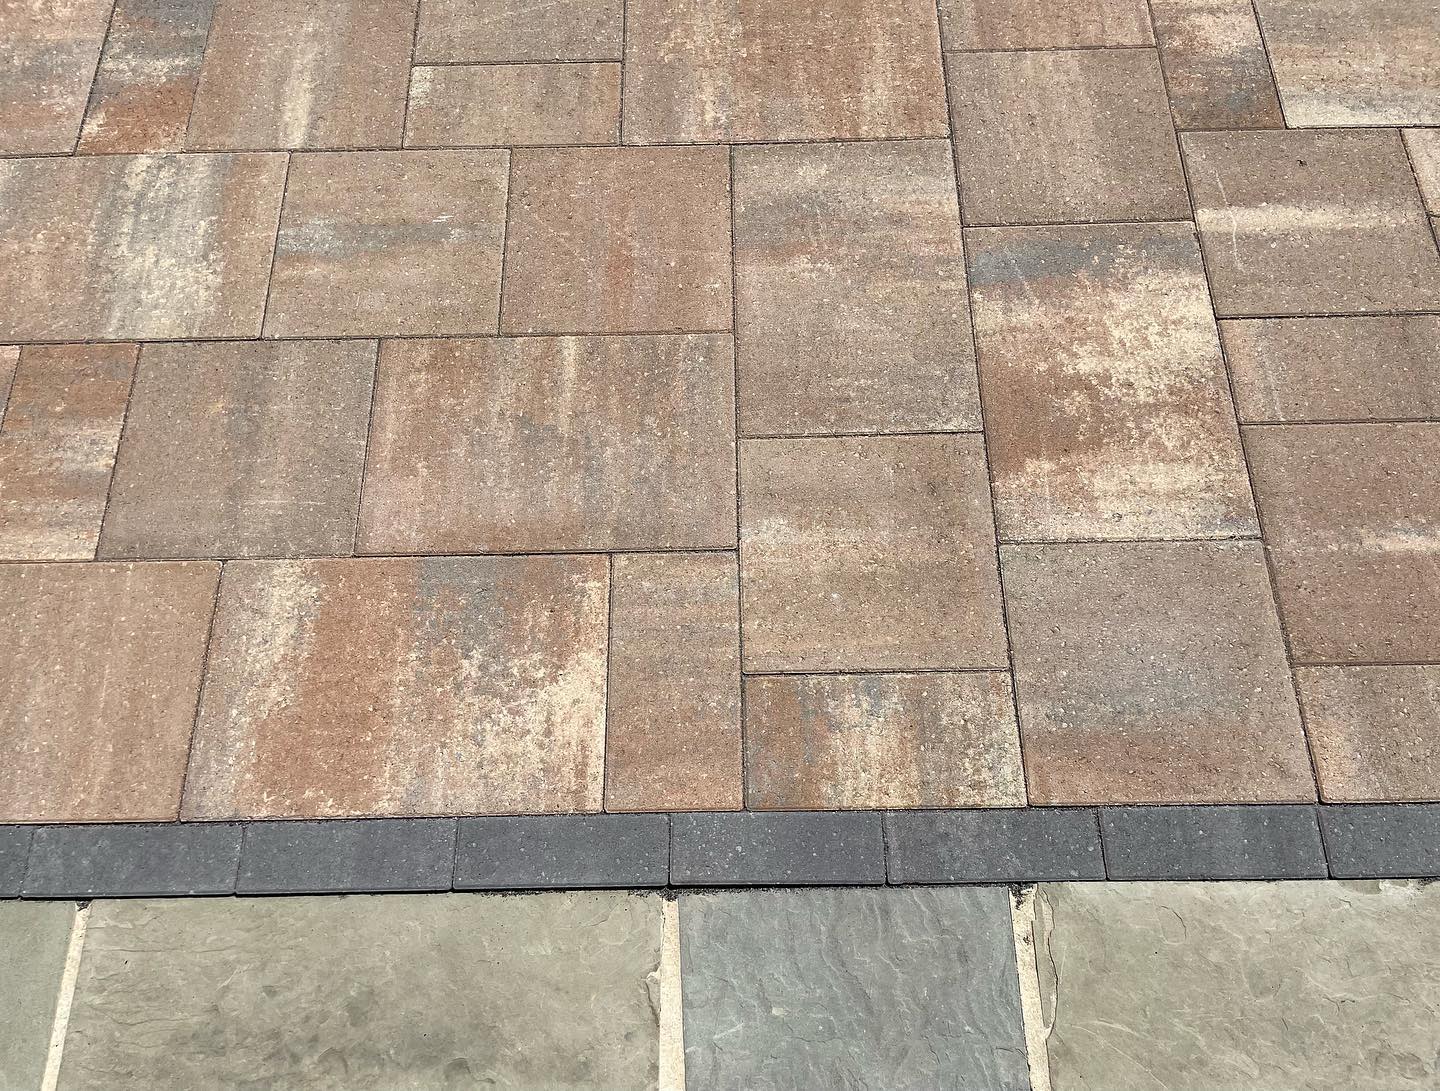 Paver Patio with Border – Outdoor Living Tip of the Day